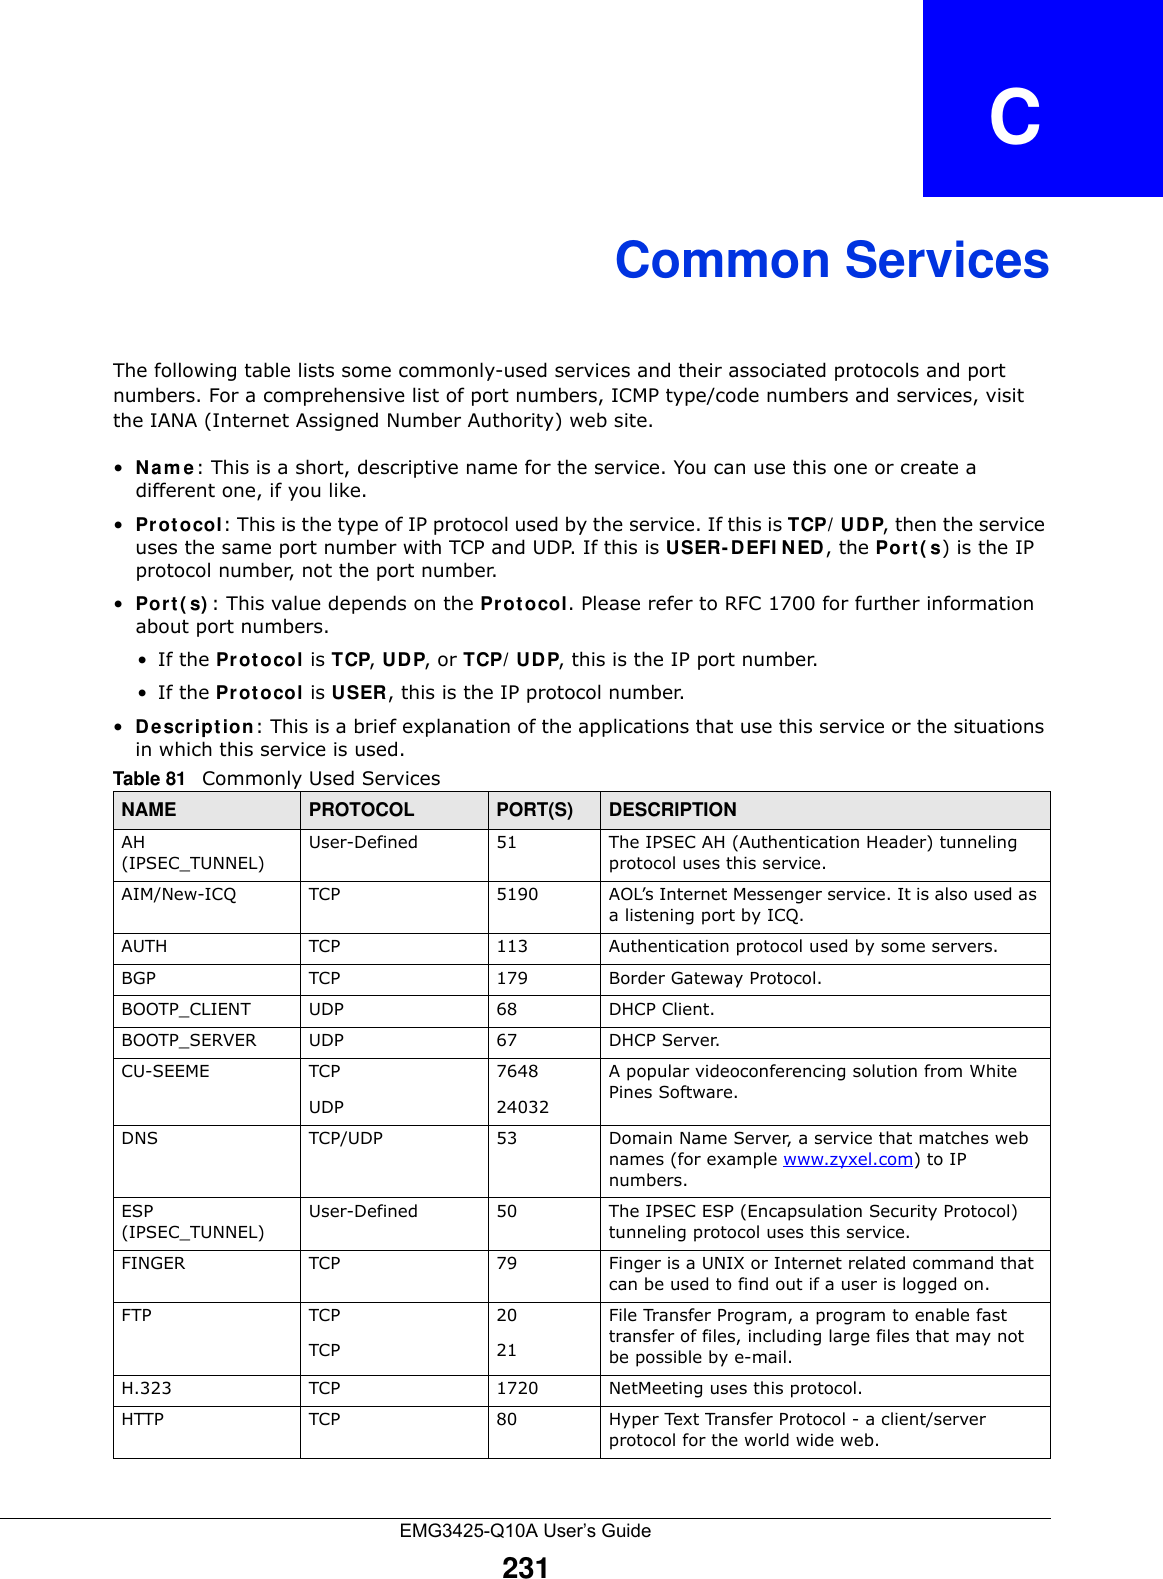 EMG3425-Q10A User’s Guide231APPENDIX   CCommon ServicesThe following table lists some commonly-used services and their associated protocols and port numbers. For a comprehensive list of port numbers, ICMP type/code numbers and services, visit the IANA (Internet Assigned Number Authority) web site. •N a m e: This is a short, descriptive name for the service. You can use this one or create a different one, if you like.•Pr ot o col: This is the type of IP protocol used by the service. If this is TCP/ UD P, then the service uses the same port number with TCP and UDP. If this is USER- D EFI N ED , the Port ( s) is the IP protocol number, not the port number.•Por t ( s) : This value depends on the Pr ot ocol. Please refer to RFC 1700 for further information about port numbers.•If the Pr ot oco l is TCP, UD P, or TCP/ UD P, this is the IP port number.•If the Pr ot oco l is USER, this is the IP protocol number.•D e scr ipt ion : This is a brief explanation of the applications that use this service or the situations in which this service is used.Table 81   Commonly Used ServicesNAME PROTOCOL PORT(S) DESCRIPTIONAH (IPSEC_TUNNEL)User-Defined 51 The IPSEC AH (Authentication Header) tunneling protocol uses this service.AIM/New-ICQ TCP 5190 AOL’s Internet Messenger service. It is also used as a listening port by ICQ.AUTH TCP 113 Authentication protocol used by some servers.BGP TCP 179 Border Gateway Protocol.BOOTP_CLIENT UDP 68 DHCP Client.BOOTP_SERVER UDP 67 DHCP Server.CU-SEEME TCPUDP764824032A popular videoconferencing solution from White Pines Software.DNS TCP/UDP 53 Domain Name Server, a service that matches web names (for example www.zyxel.com) to IP numbers.ESP (IPSEC_TUNNEL)User-Defined 50 The IPSEC ESP (Encapsulation Security Protocol) tunneling protocol uses this service.FINGER TCP 79 Finger is a UNIX or Internet related command that can be used to find out if a user is logged on.FTP TCPTCP2021File Transfer Program, a program to enable fast transfer of files, including large files that may not be possible by e-mail.H.323 TCP 1720 NetMeeting uses this protocol.HTTP TCP 80 Hyper Text Transfer Protocol - a client/server protocol for the world wide web.